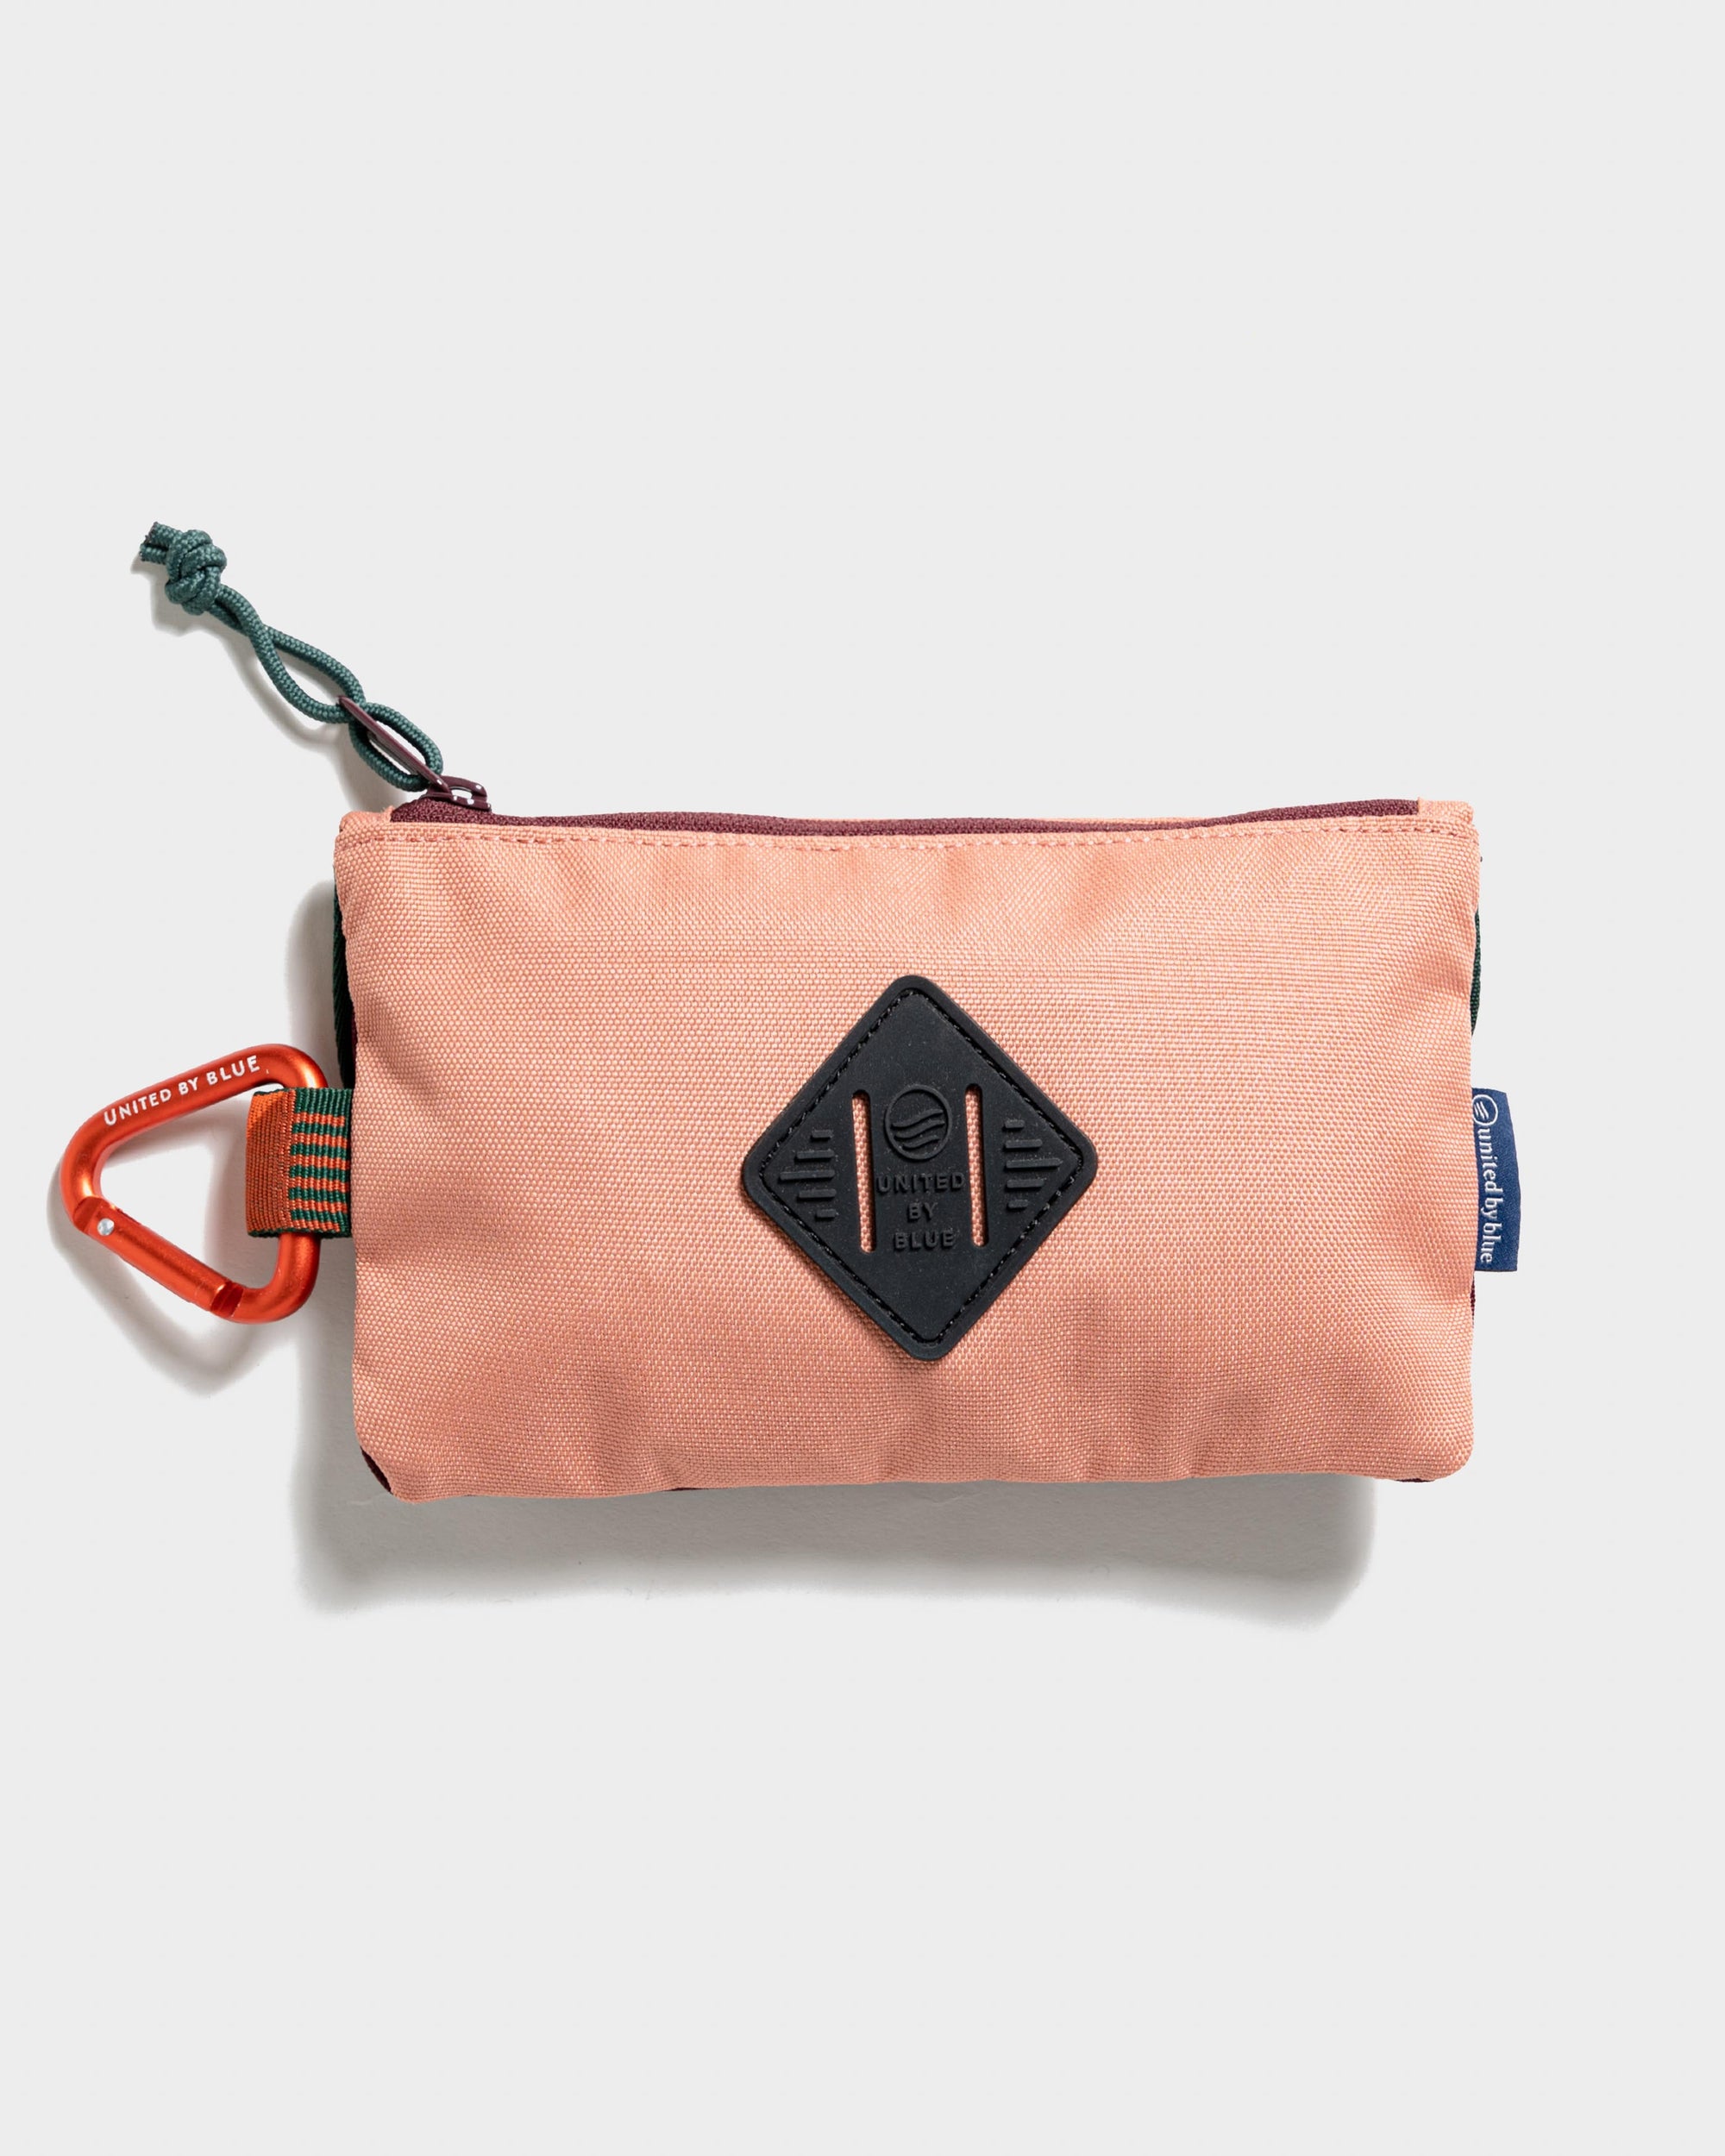 Pocket Pouch